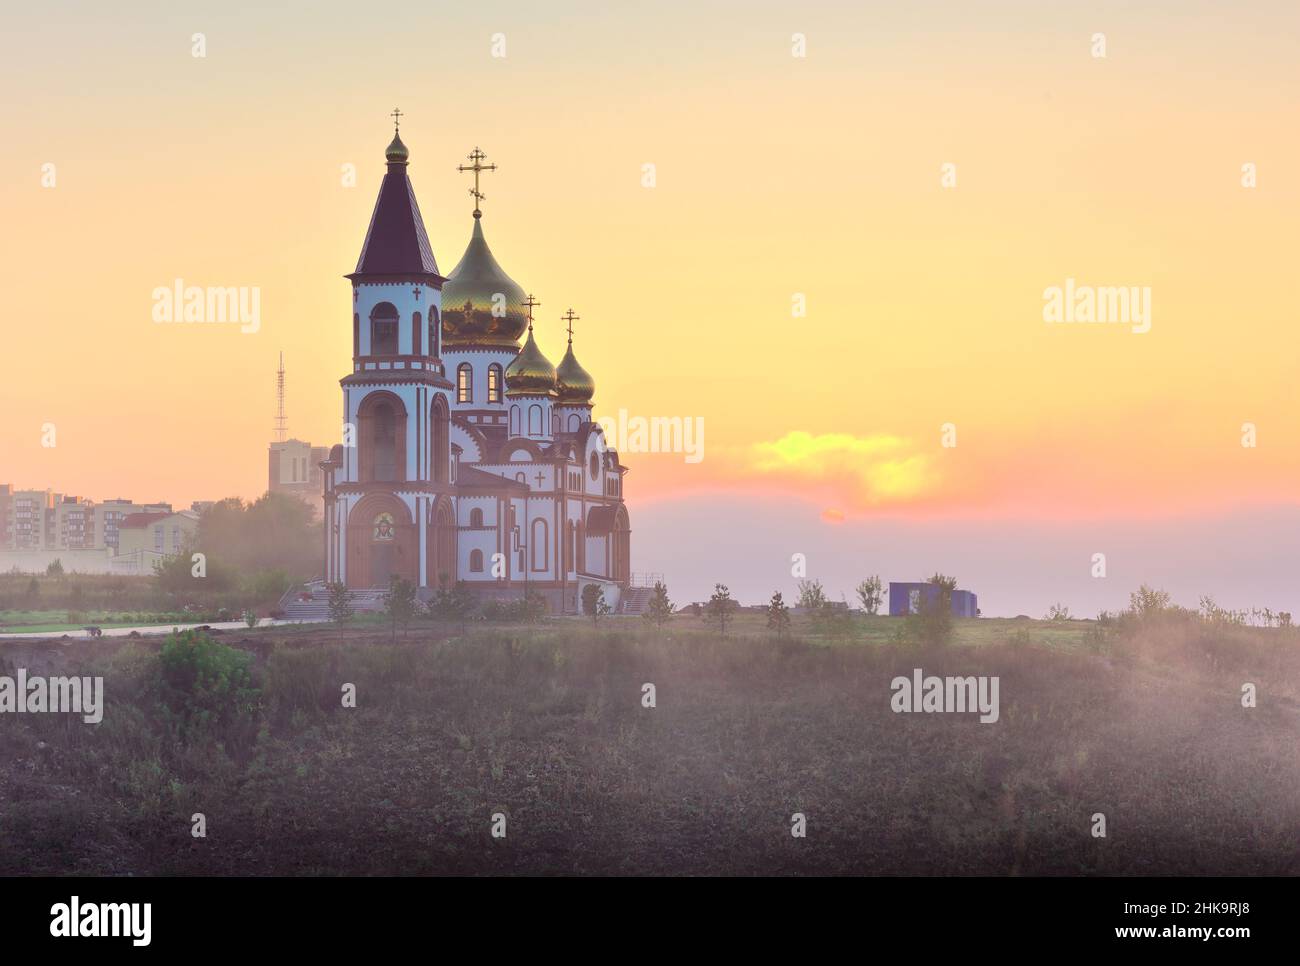 Orthodox church on the outskirts of the city in the morning fog at dawn. Krasnoyarsk, Siberia, Russia Stock Photo